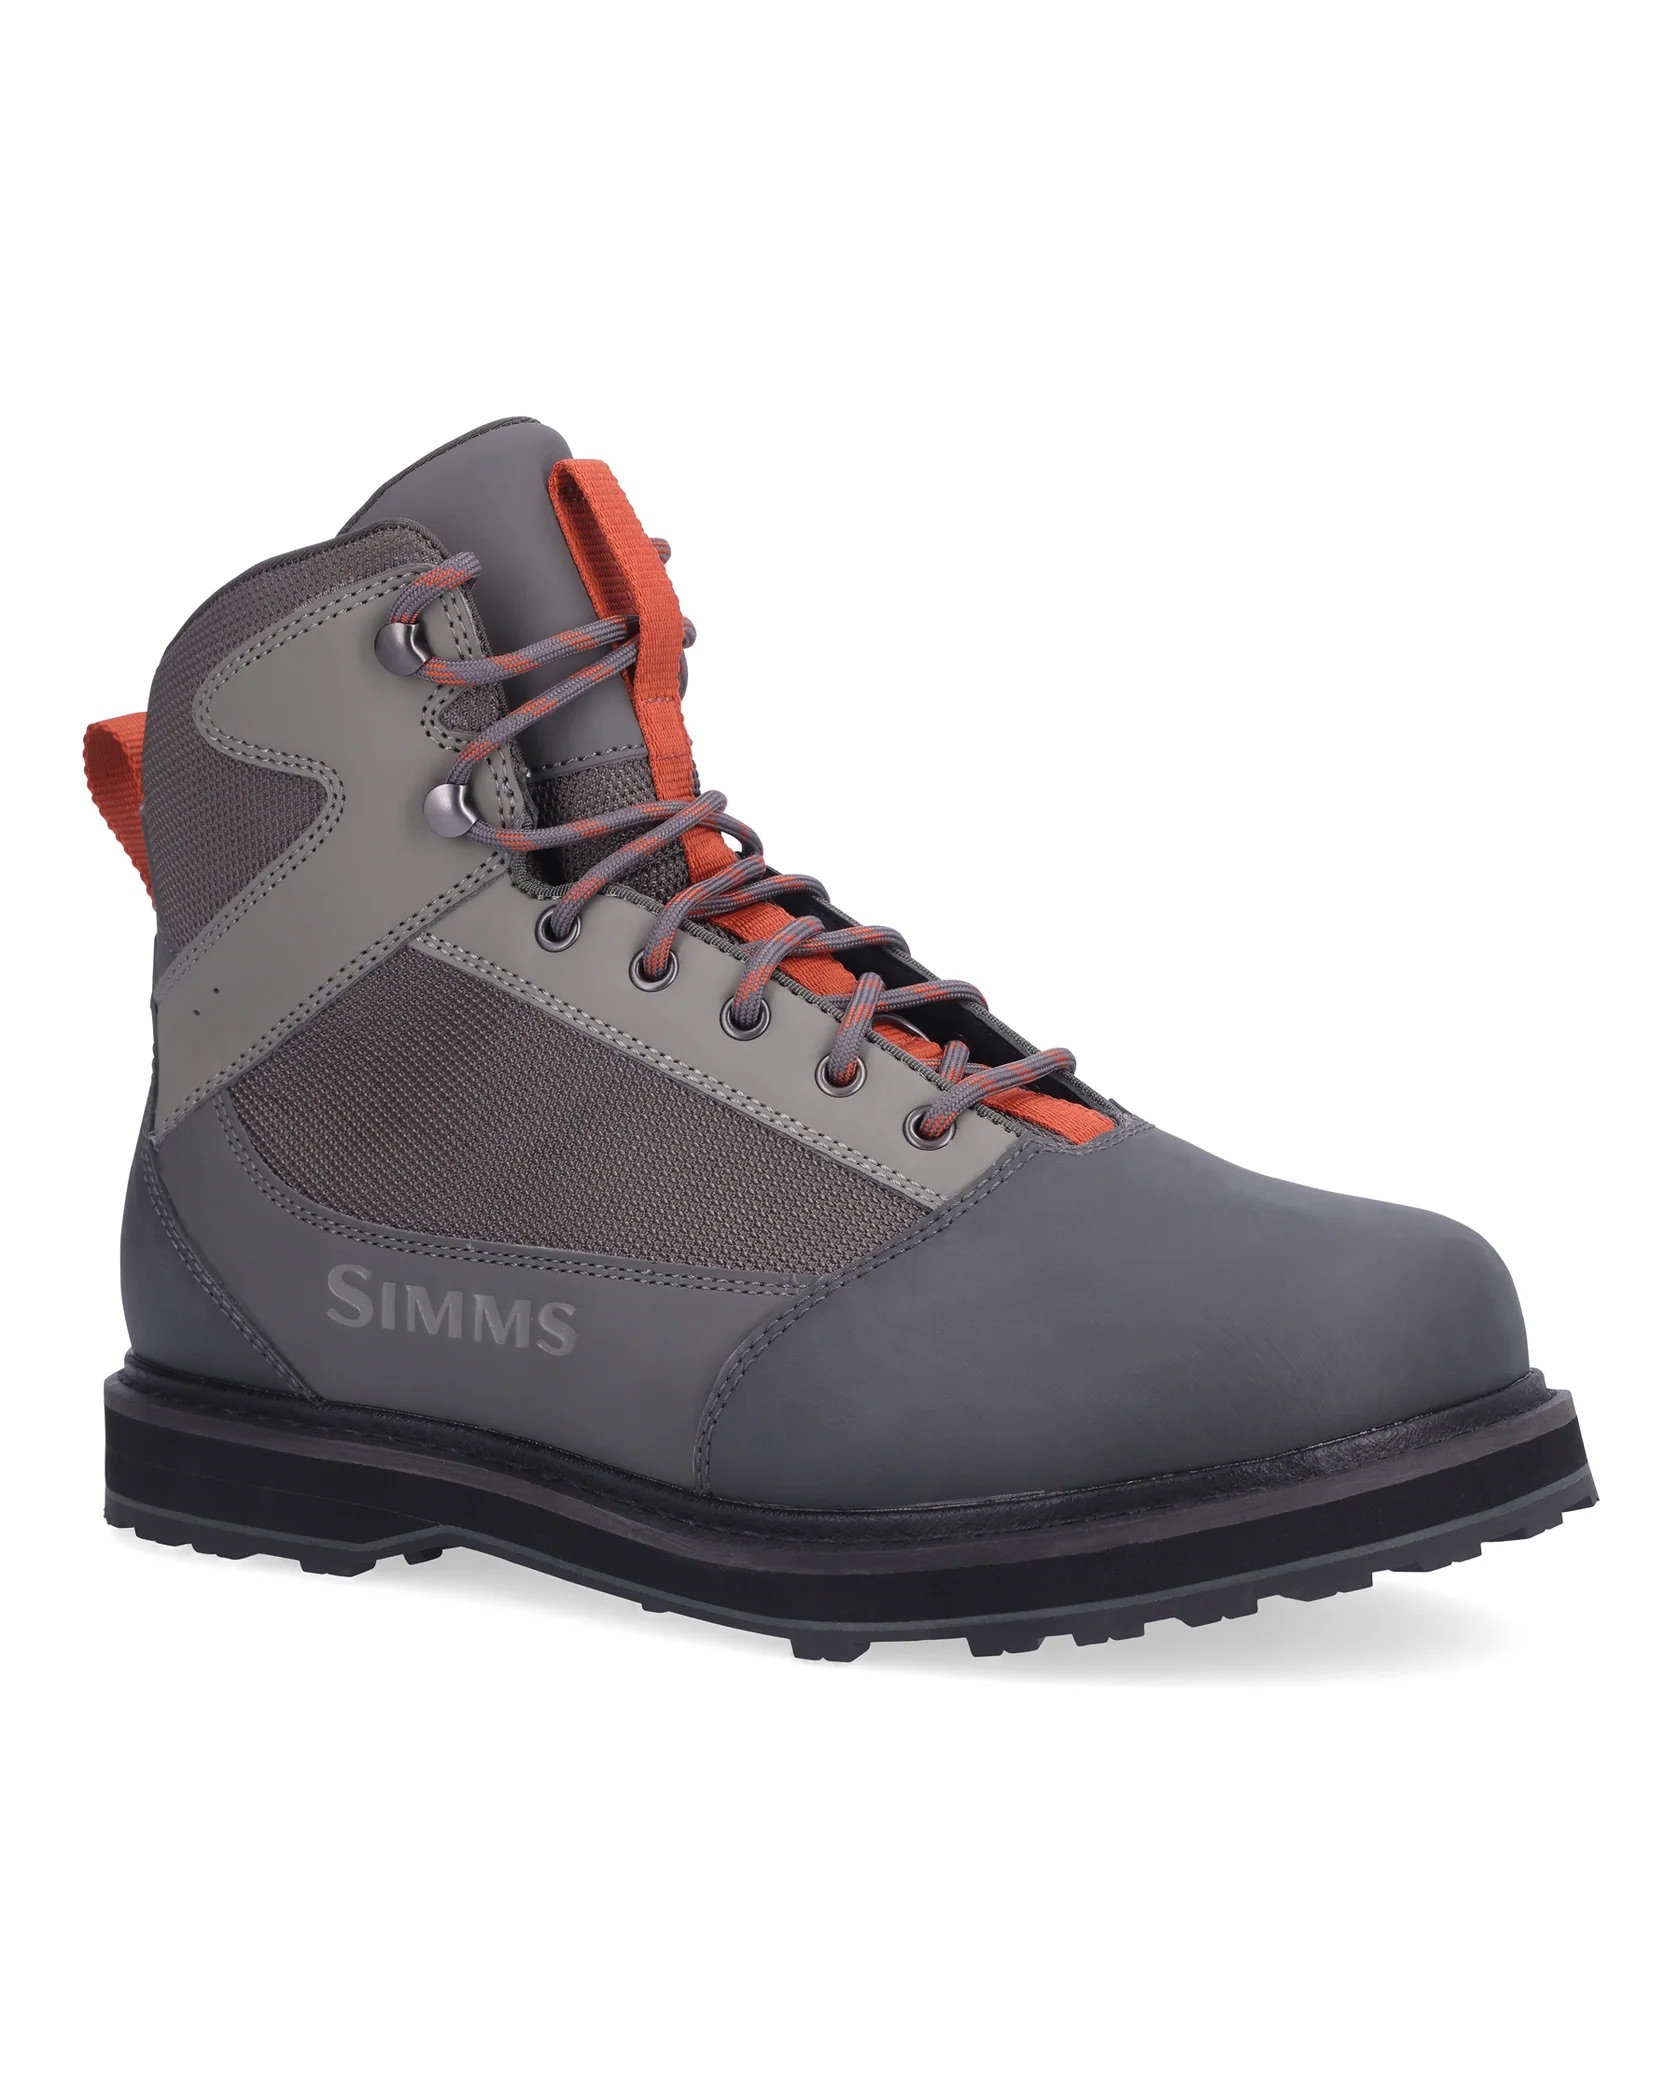 Simms Tributary Wading Boot - Rubber - Size 11